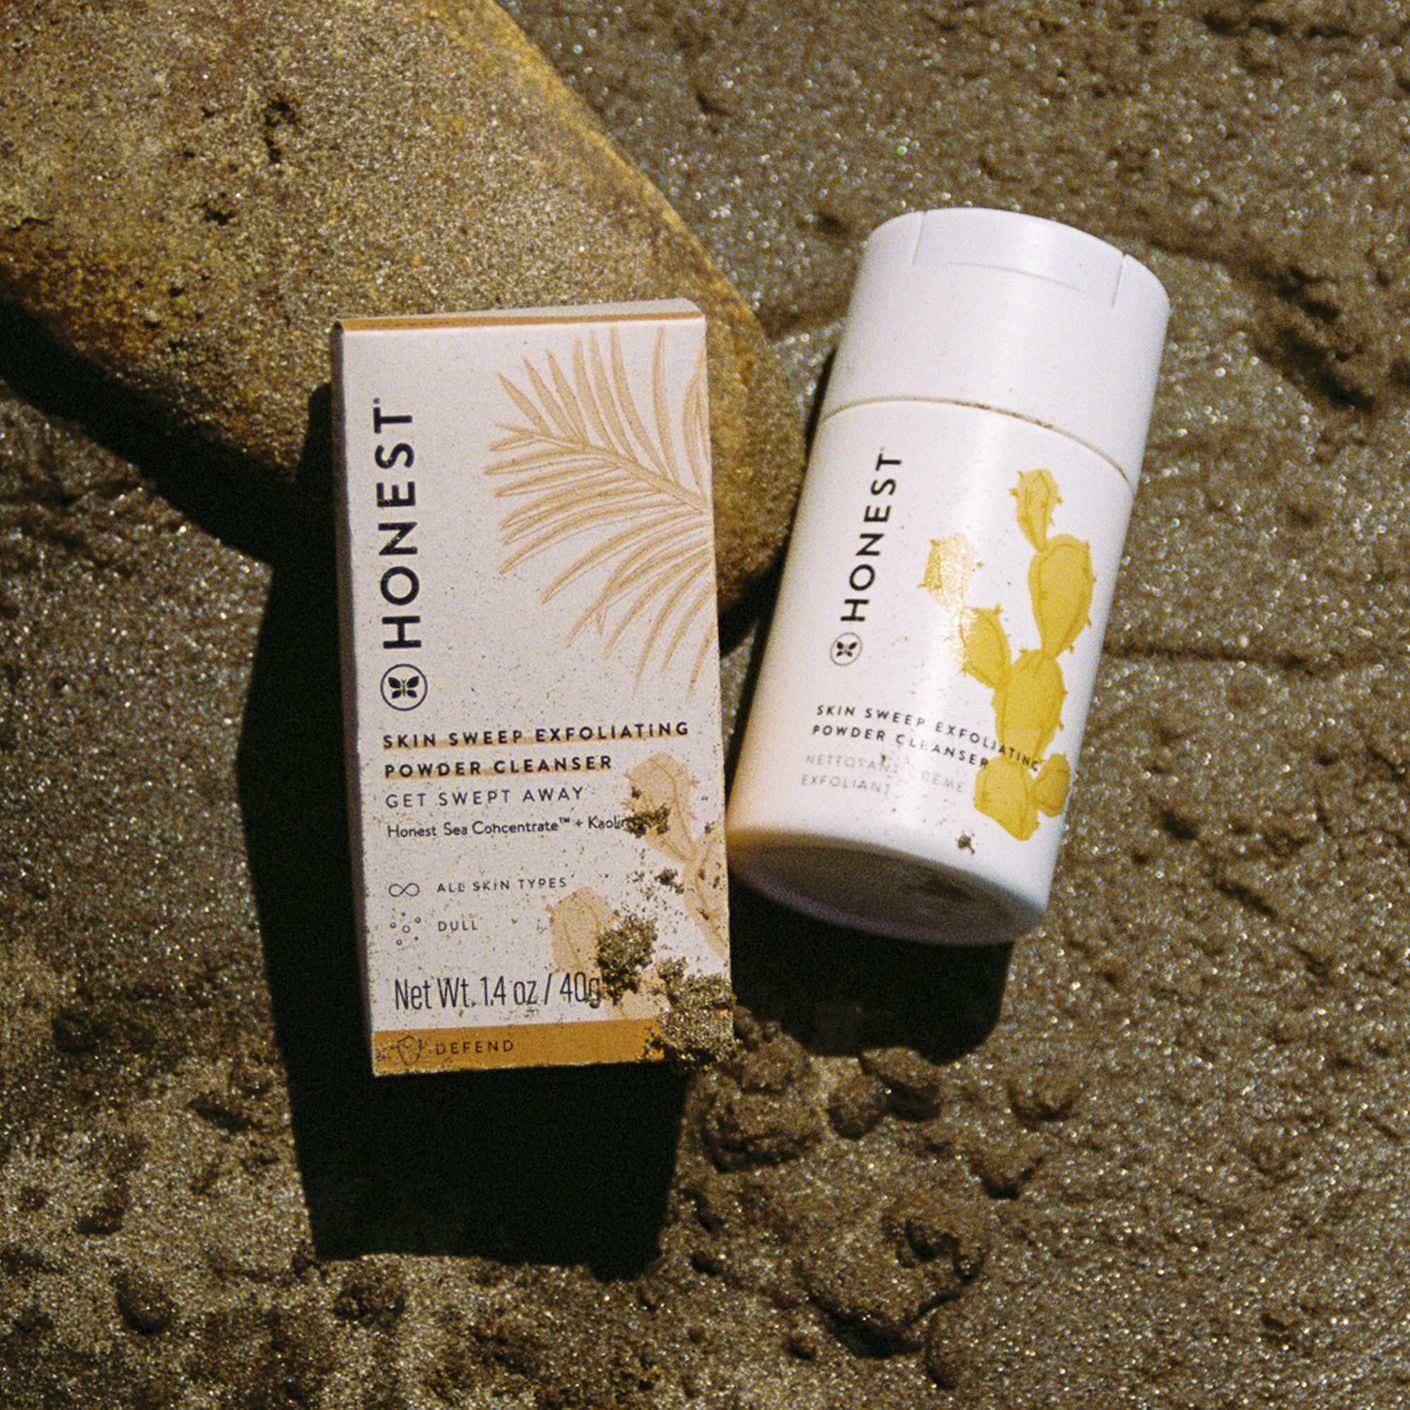 A cylindrical container of powder cleanser lies in a sunny patch of sand.